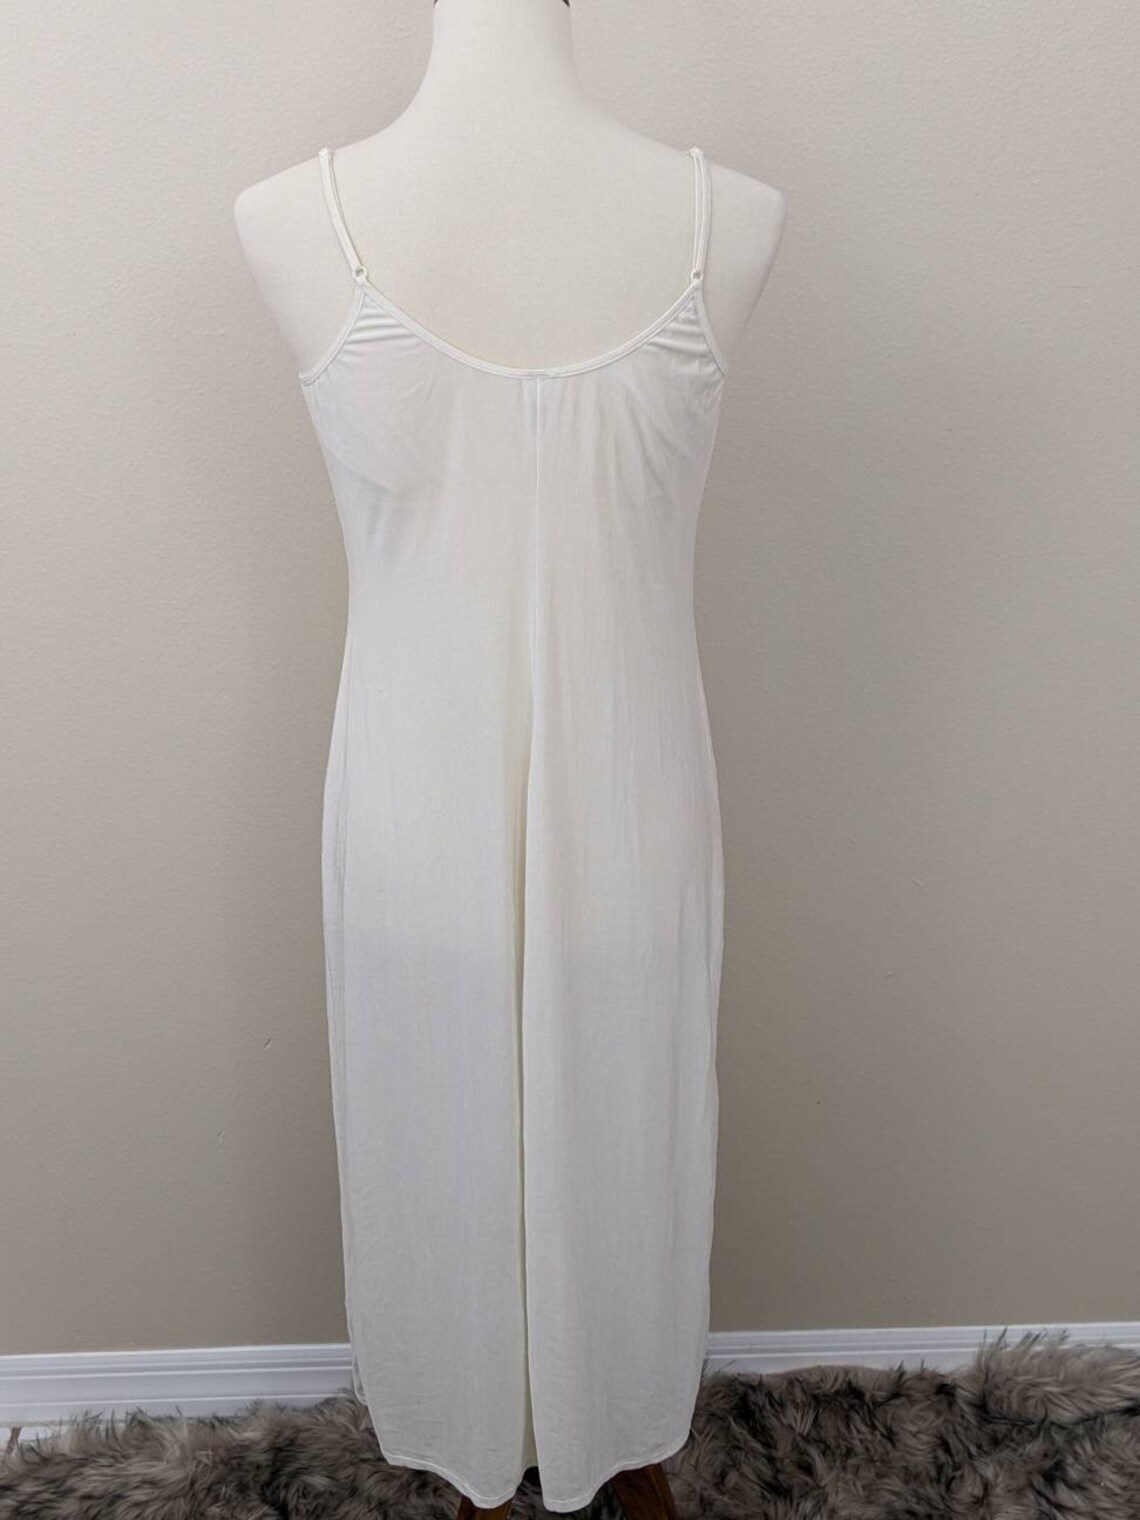 VICTORIA'S SECRET Long Nightgown Sheer White Nightgown | Etsy